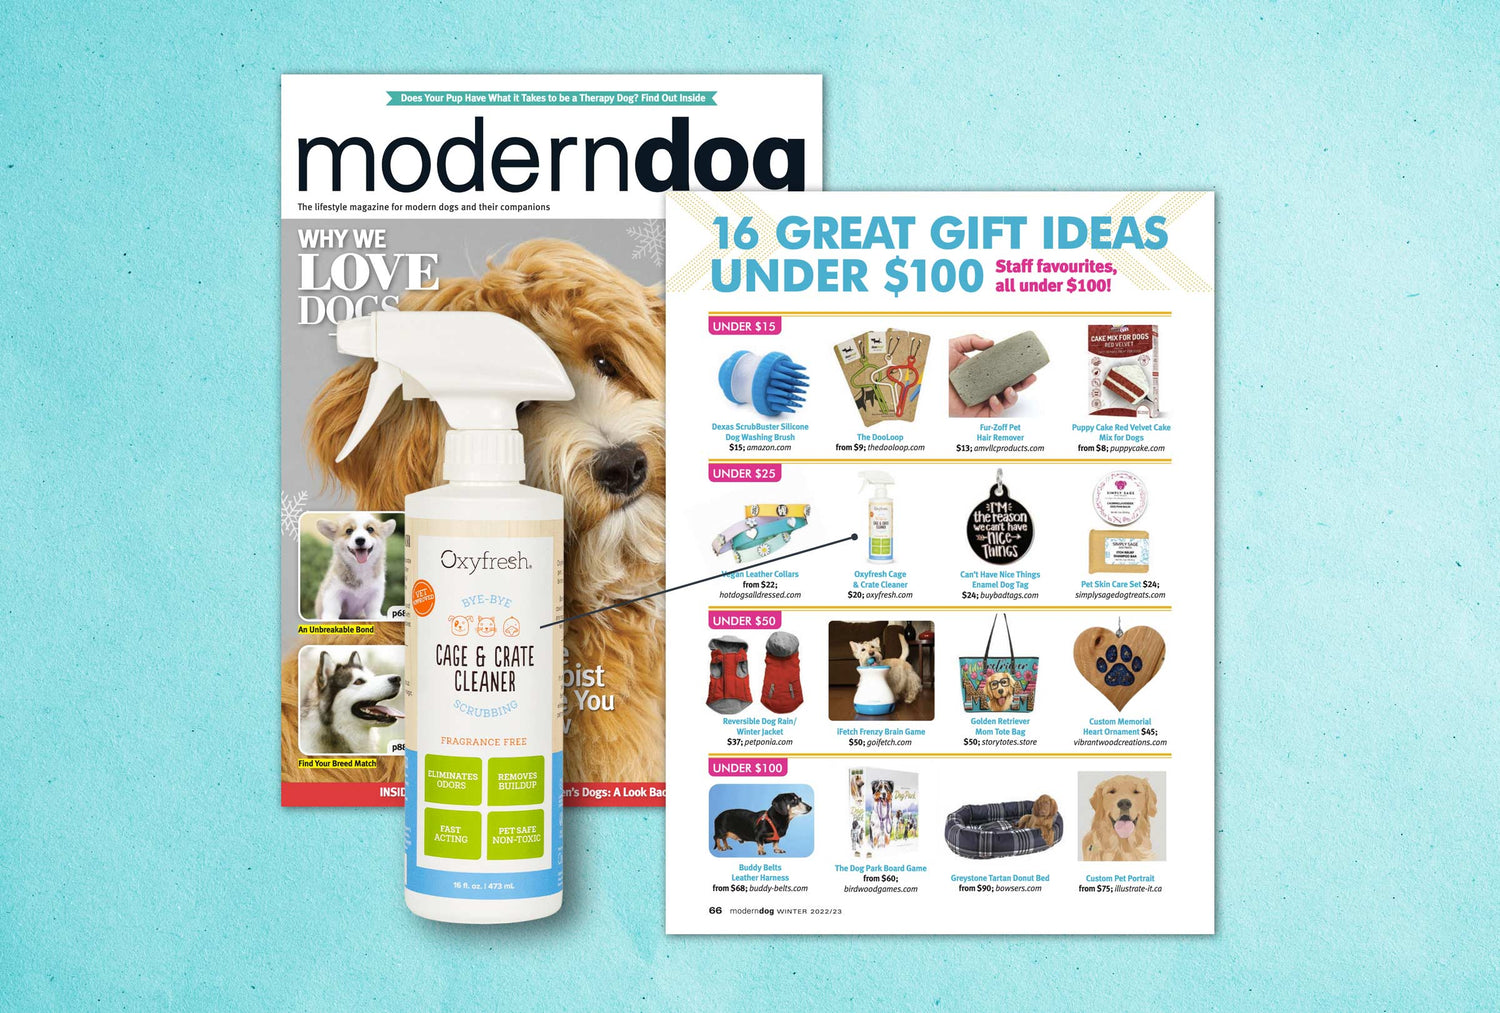 Oxyfresh Cage & Crate Cleaner Named a Top Gift Idea by Modern Dog 